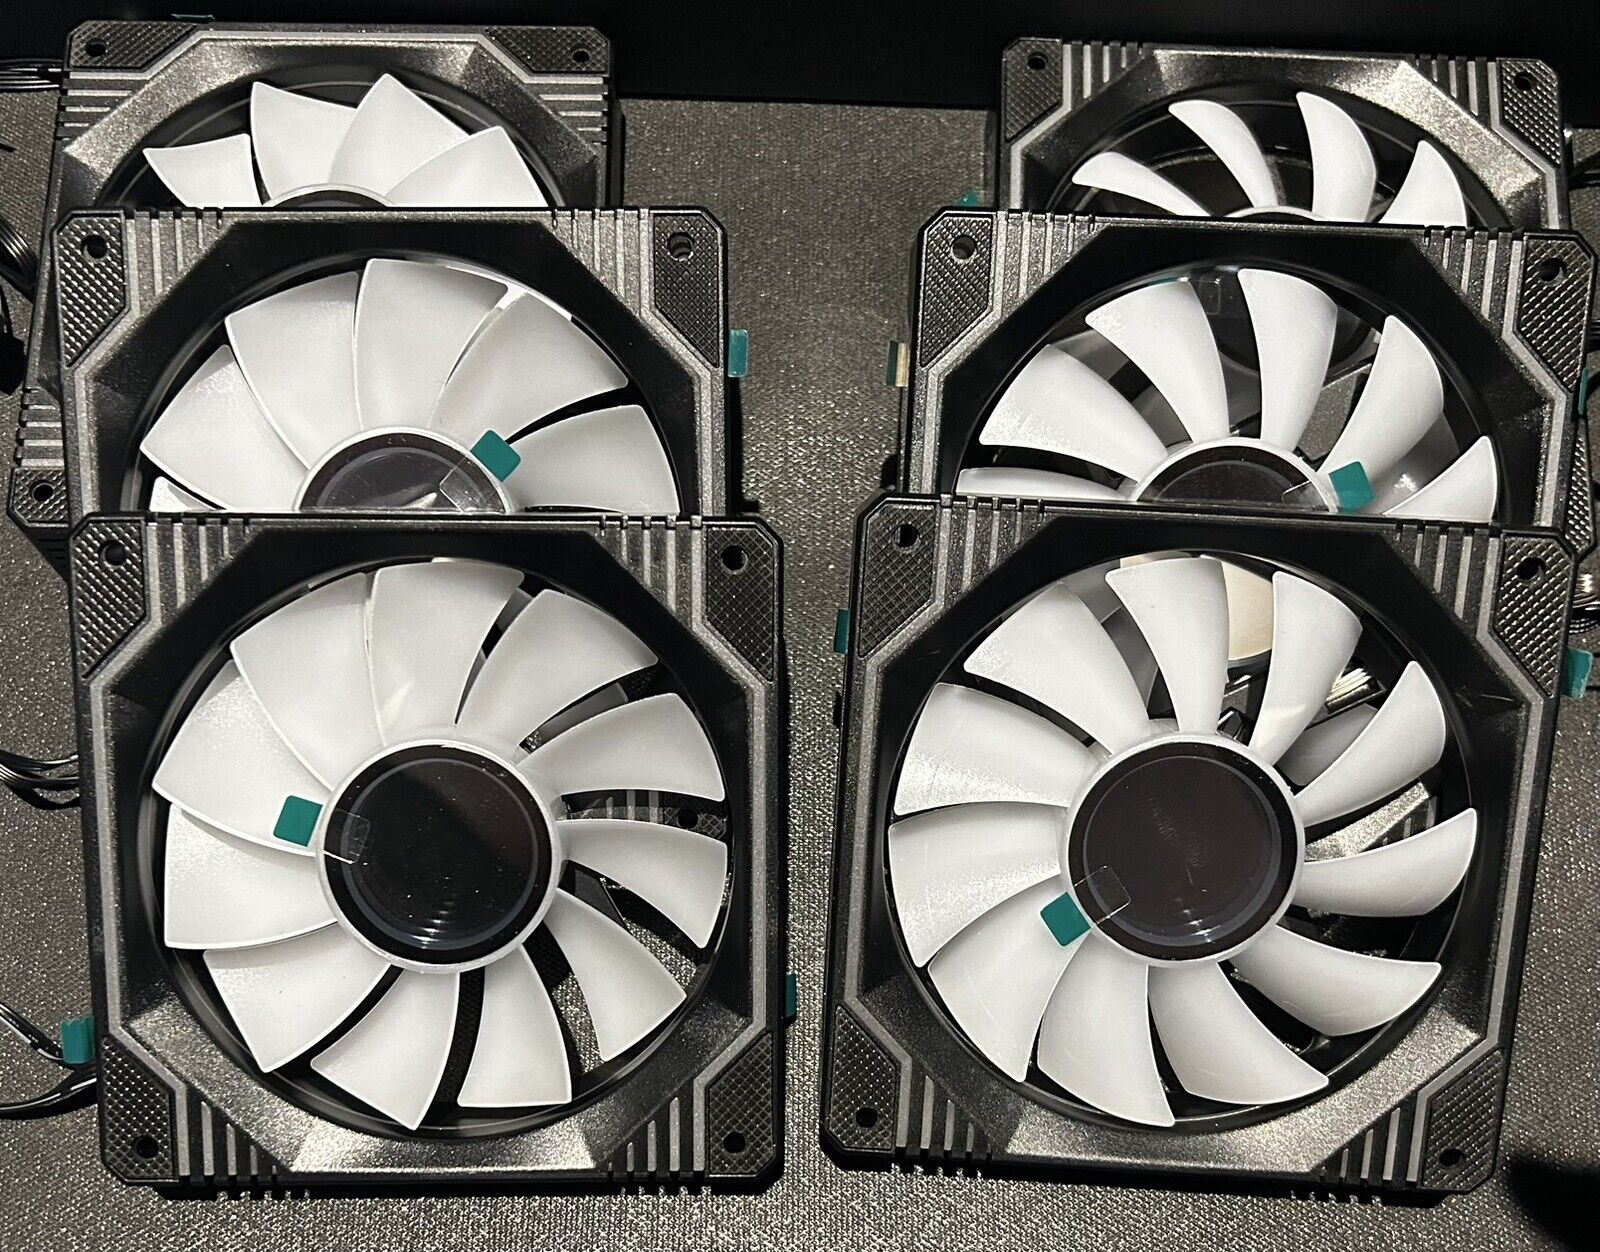 Sirius Infinity 3x120mm Computer Case Fan (Forward or Reverse Blades) 3 PACK